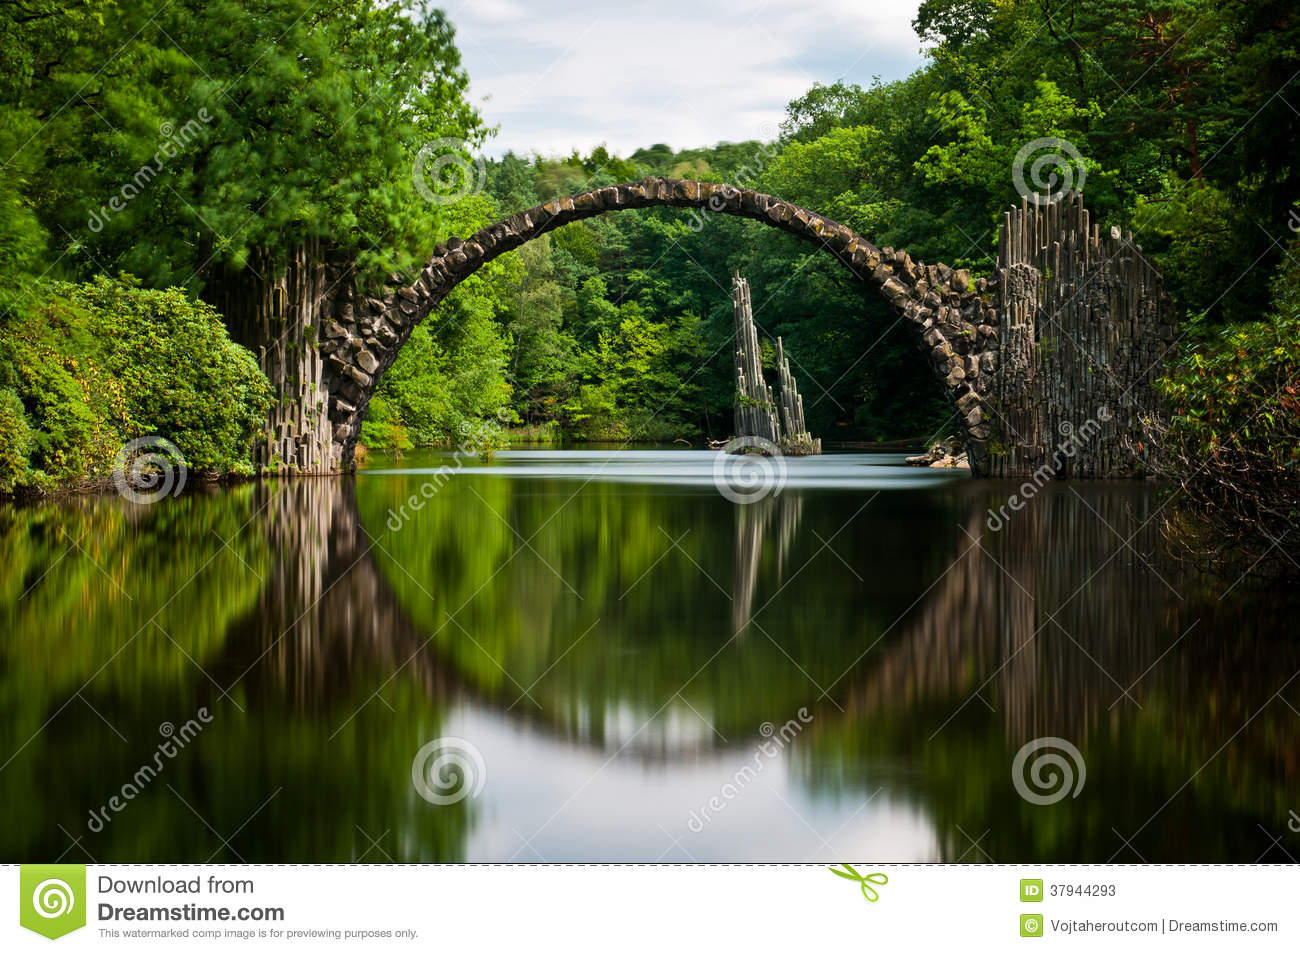 Old Stone Bridge Over The Quiet Lake With Its Reflection In The Water